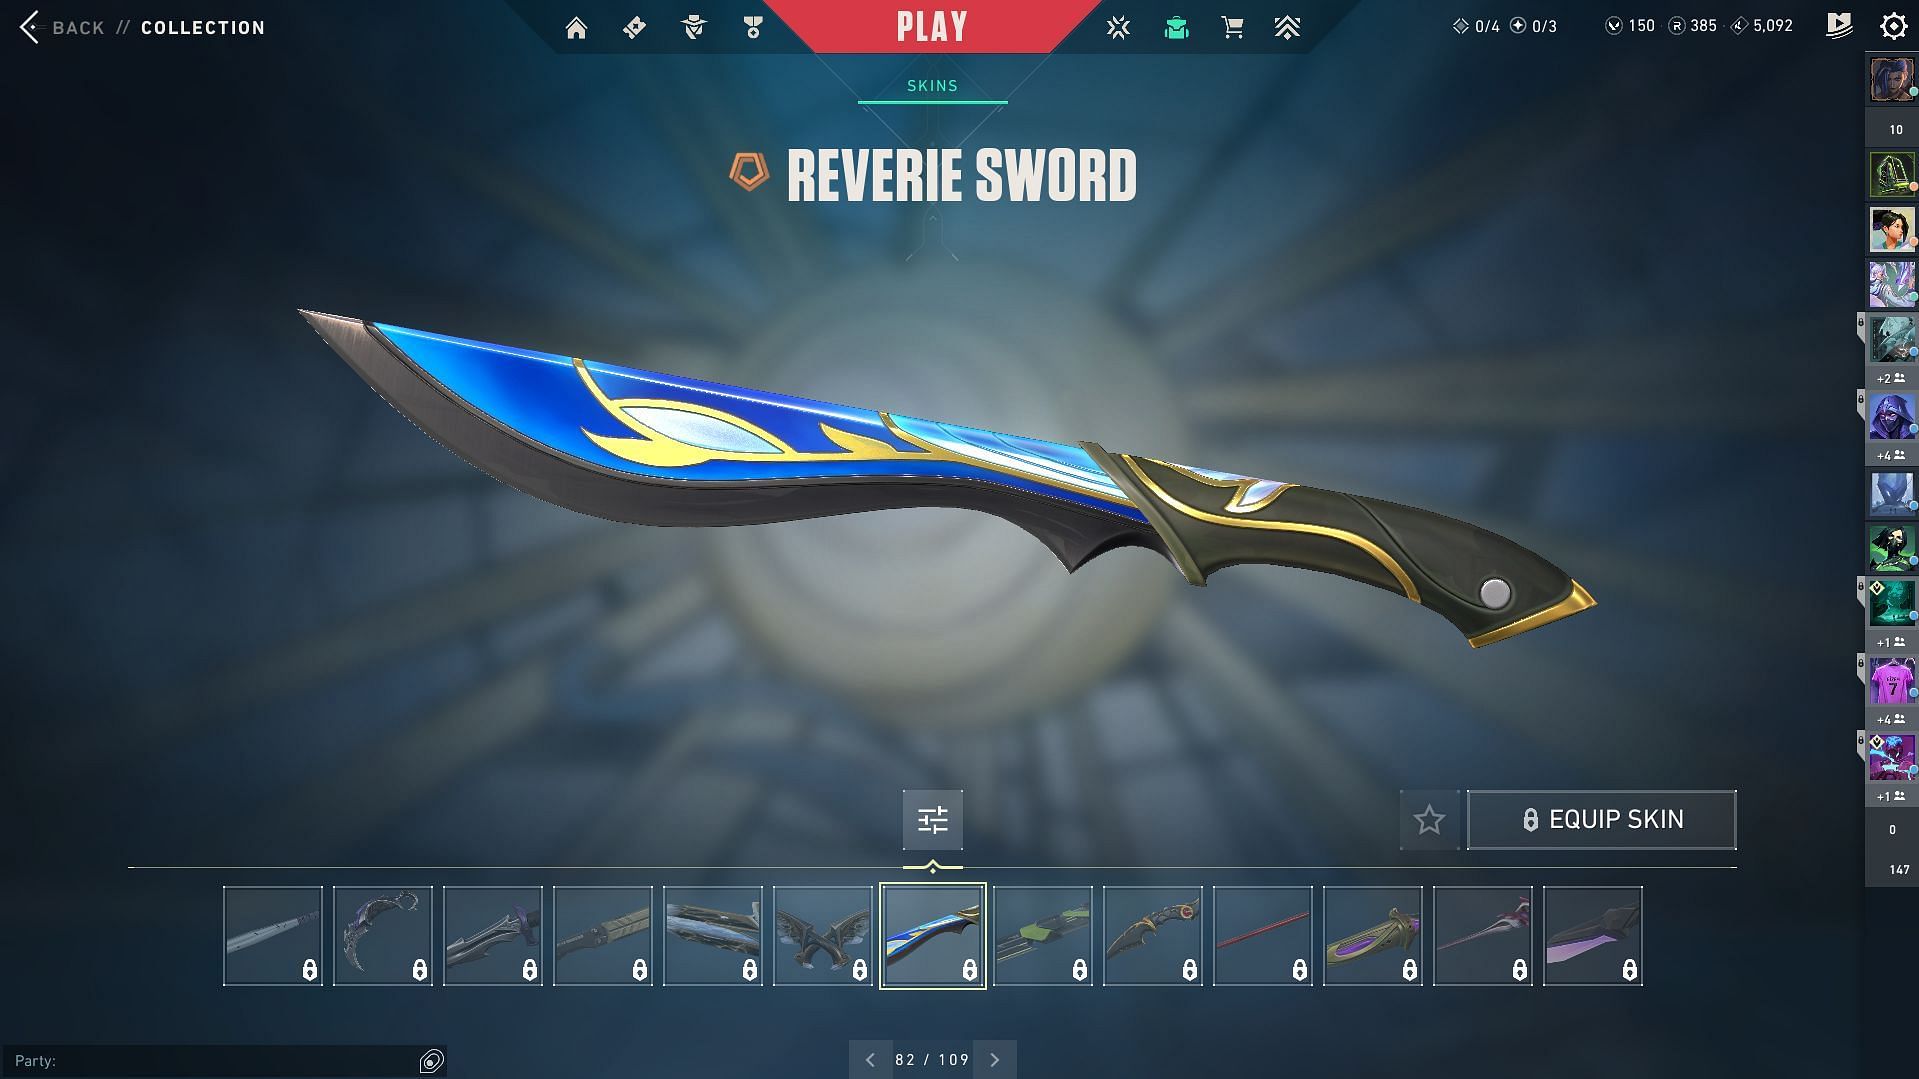 Reverie Sword in-game view (Image via Riot Games)